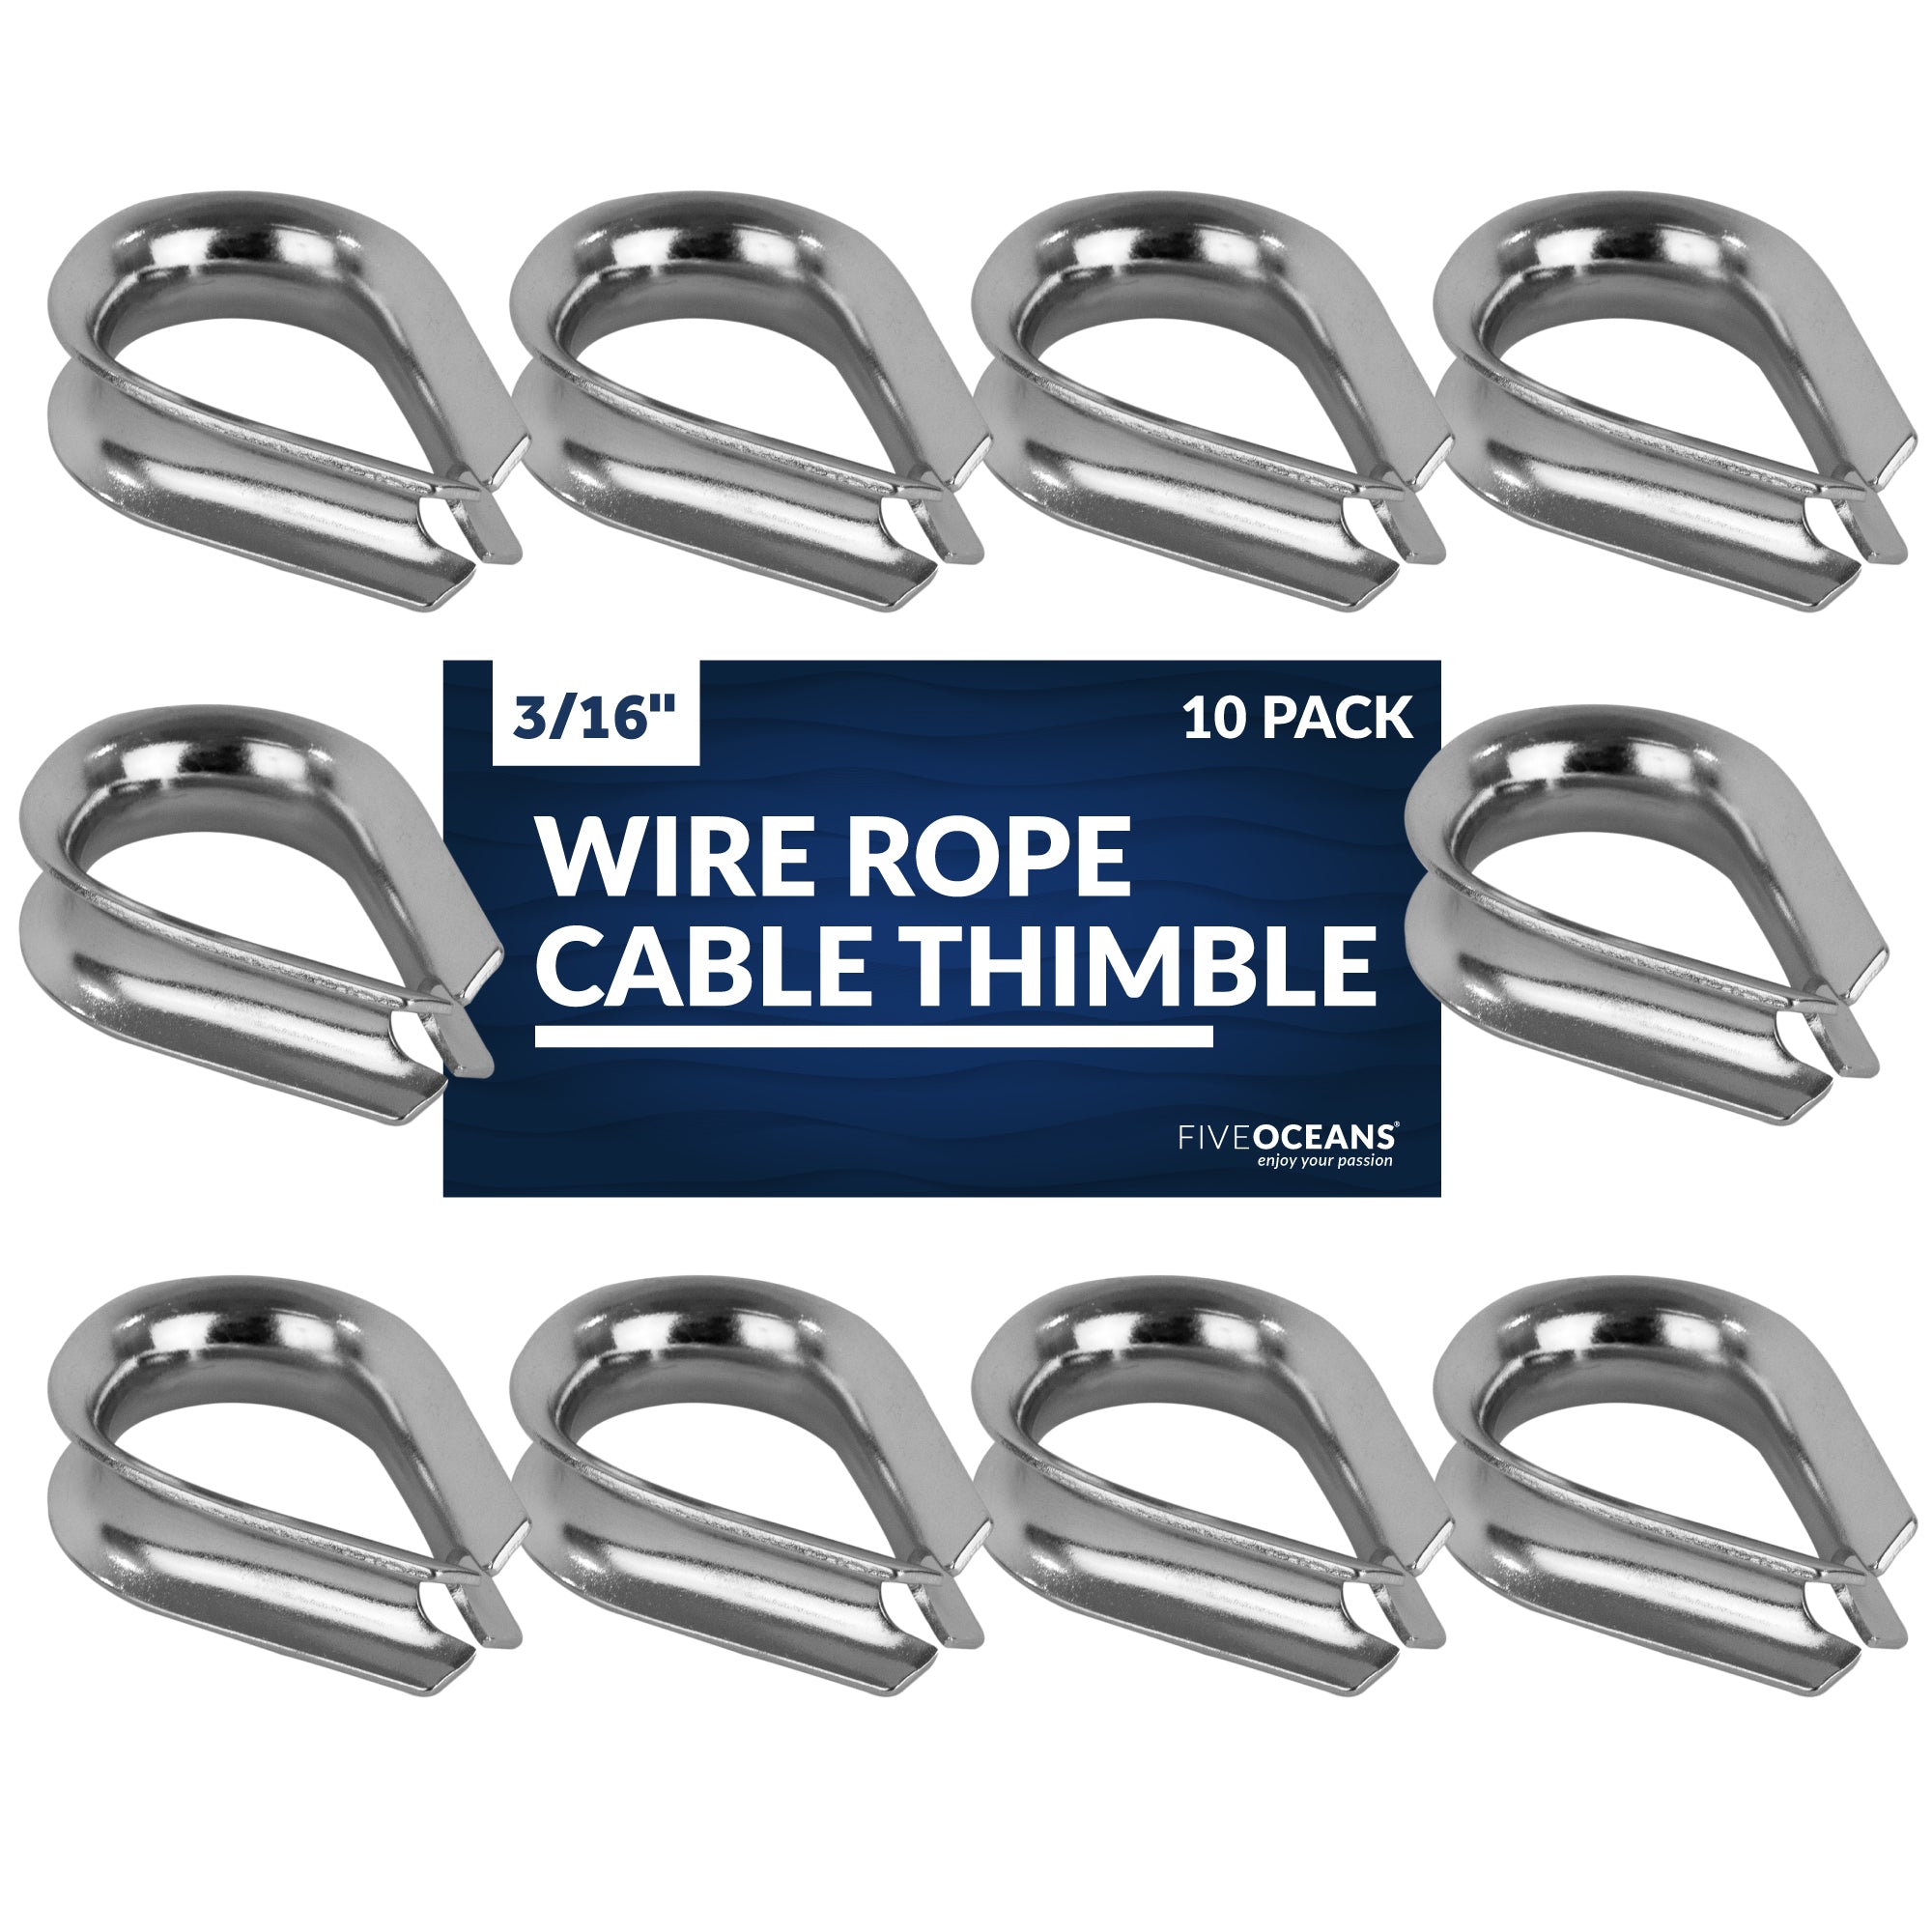 Thimble for 3/16" Wire Rope Cable, Stainless Steel - 10-Pack - FO1383-M10